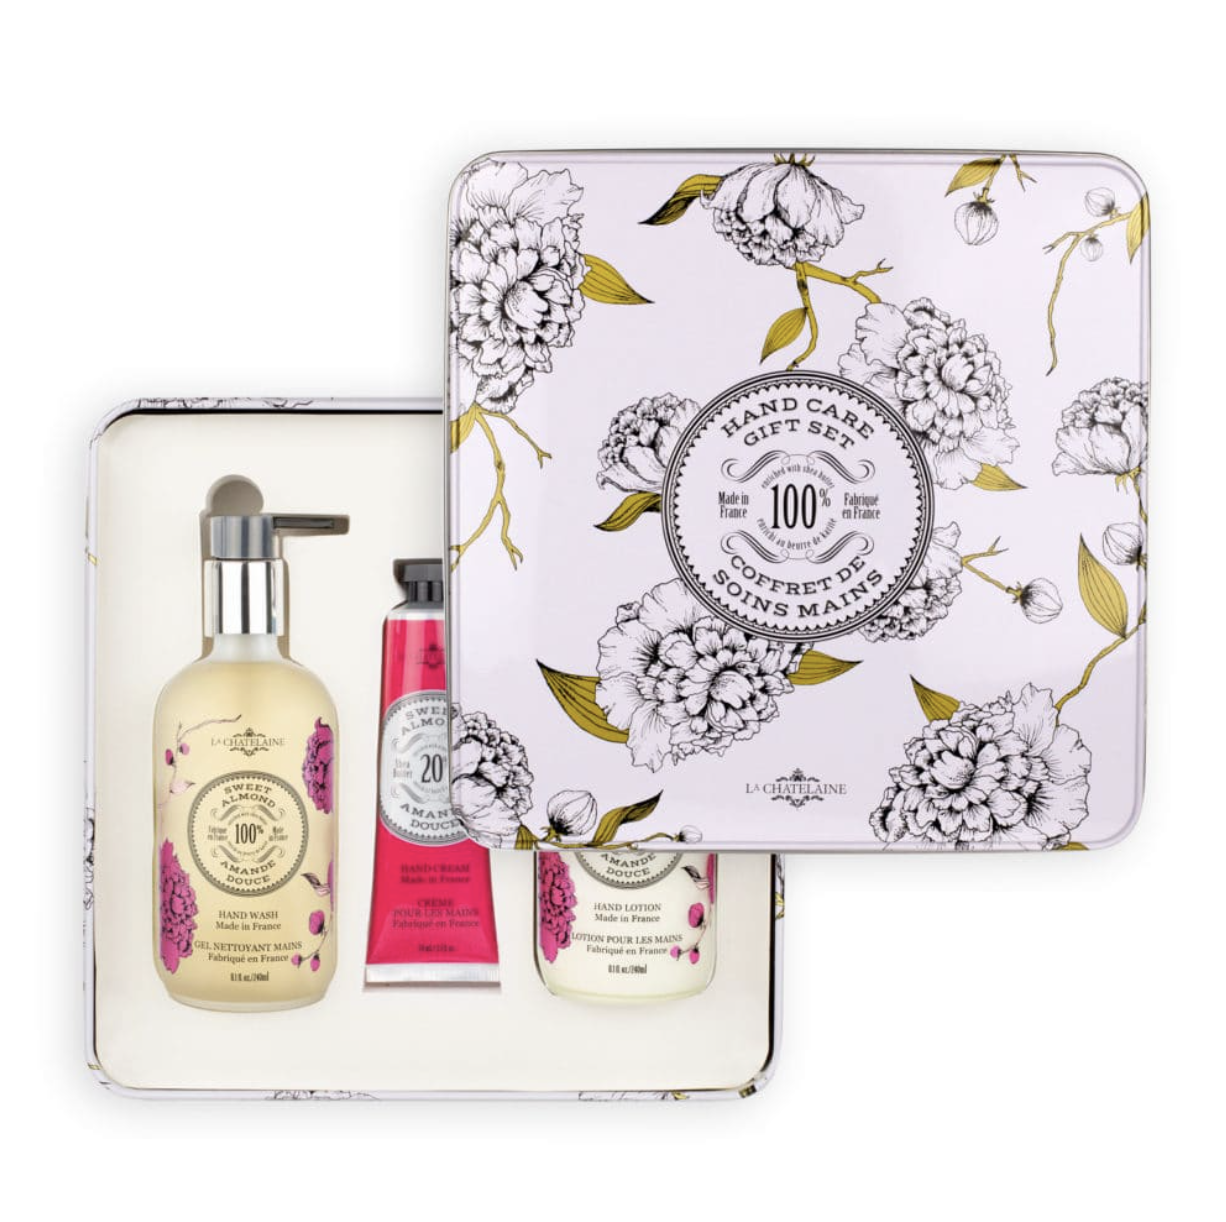 Sweet Almond Hand Care Gift Set